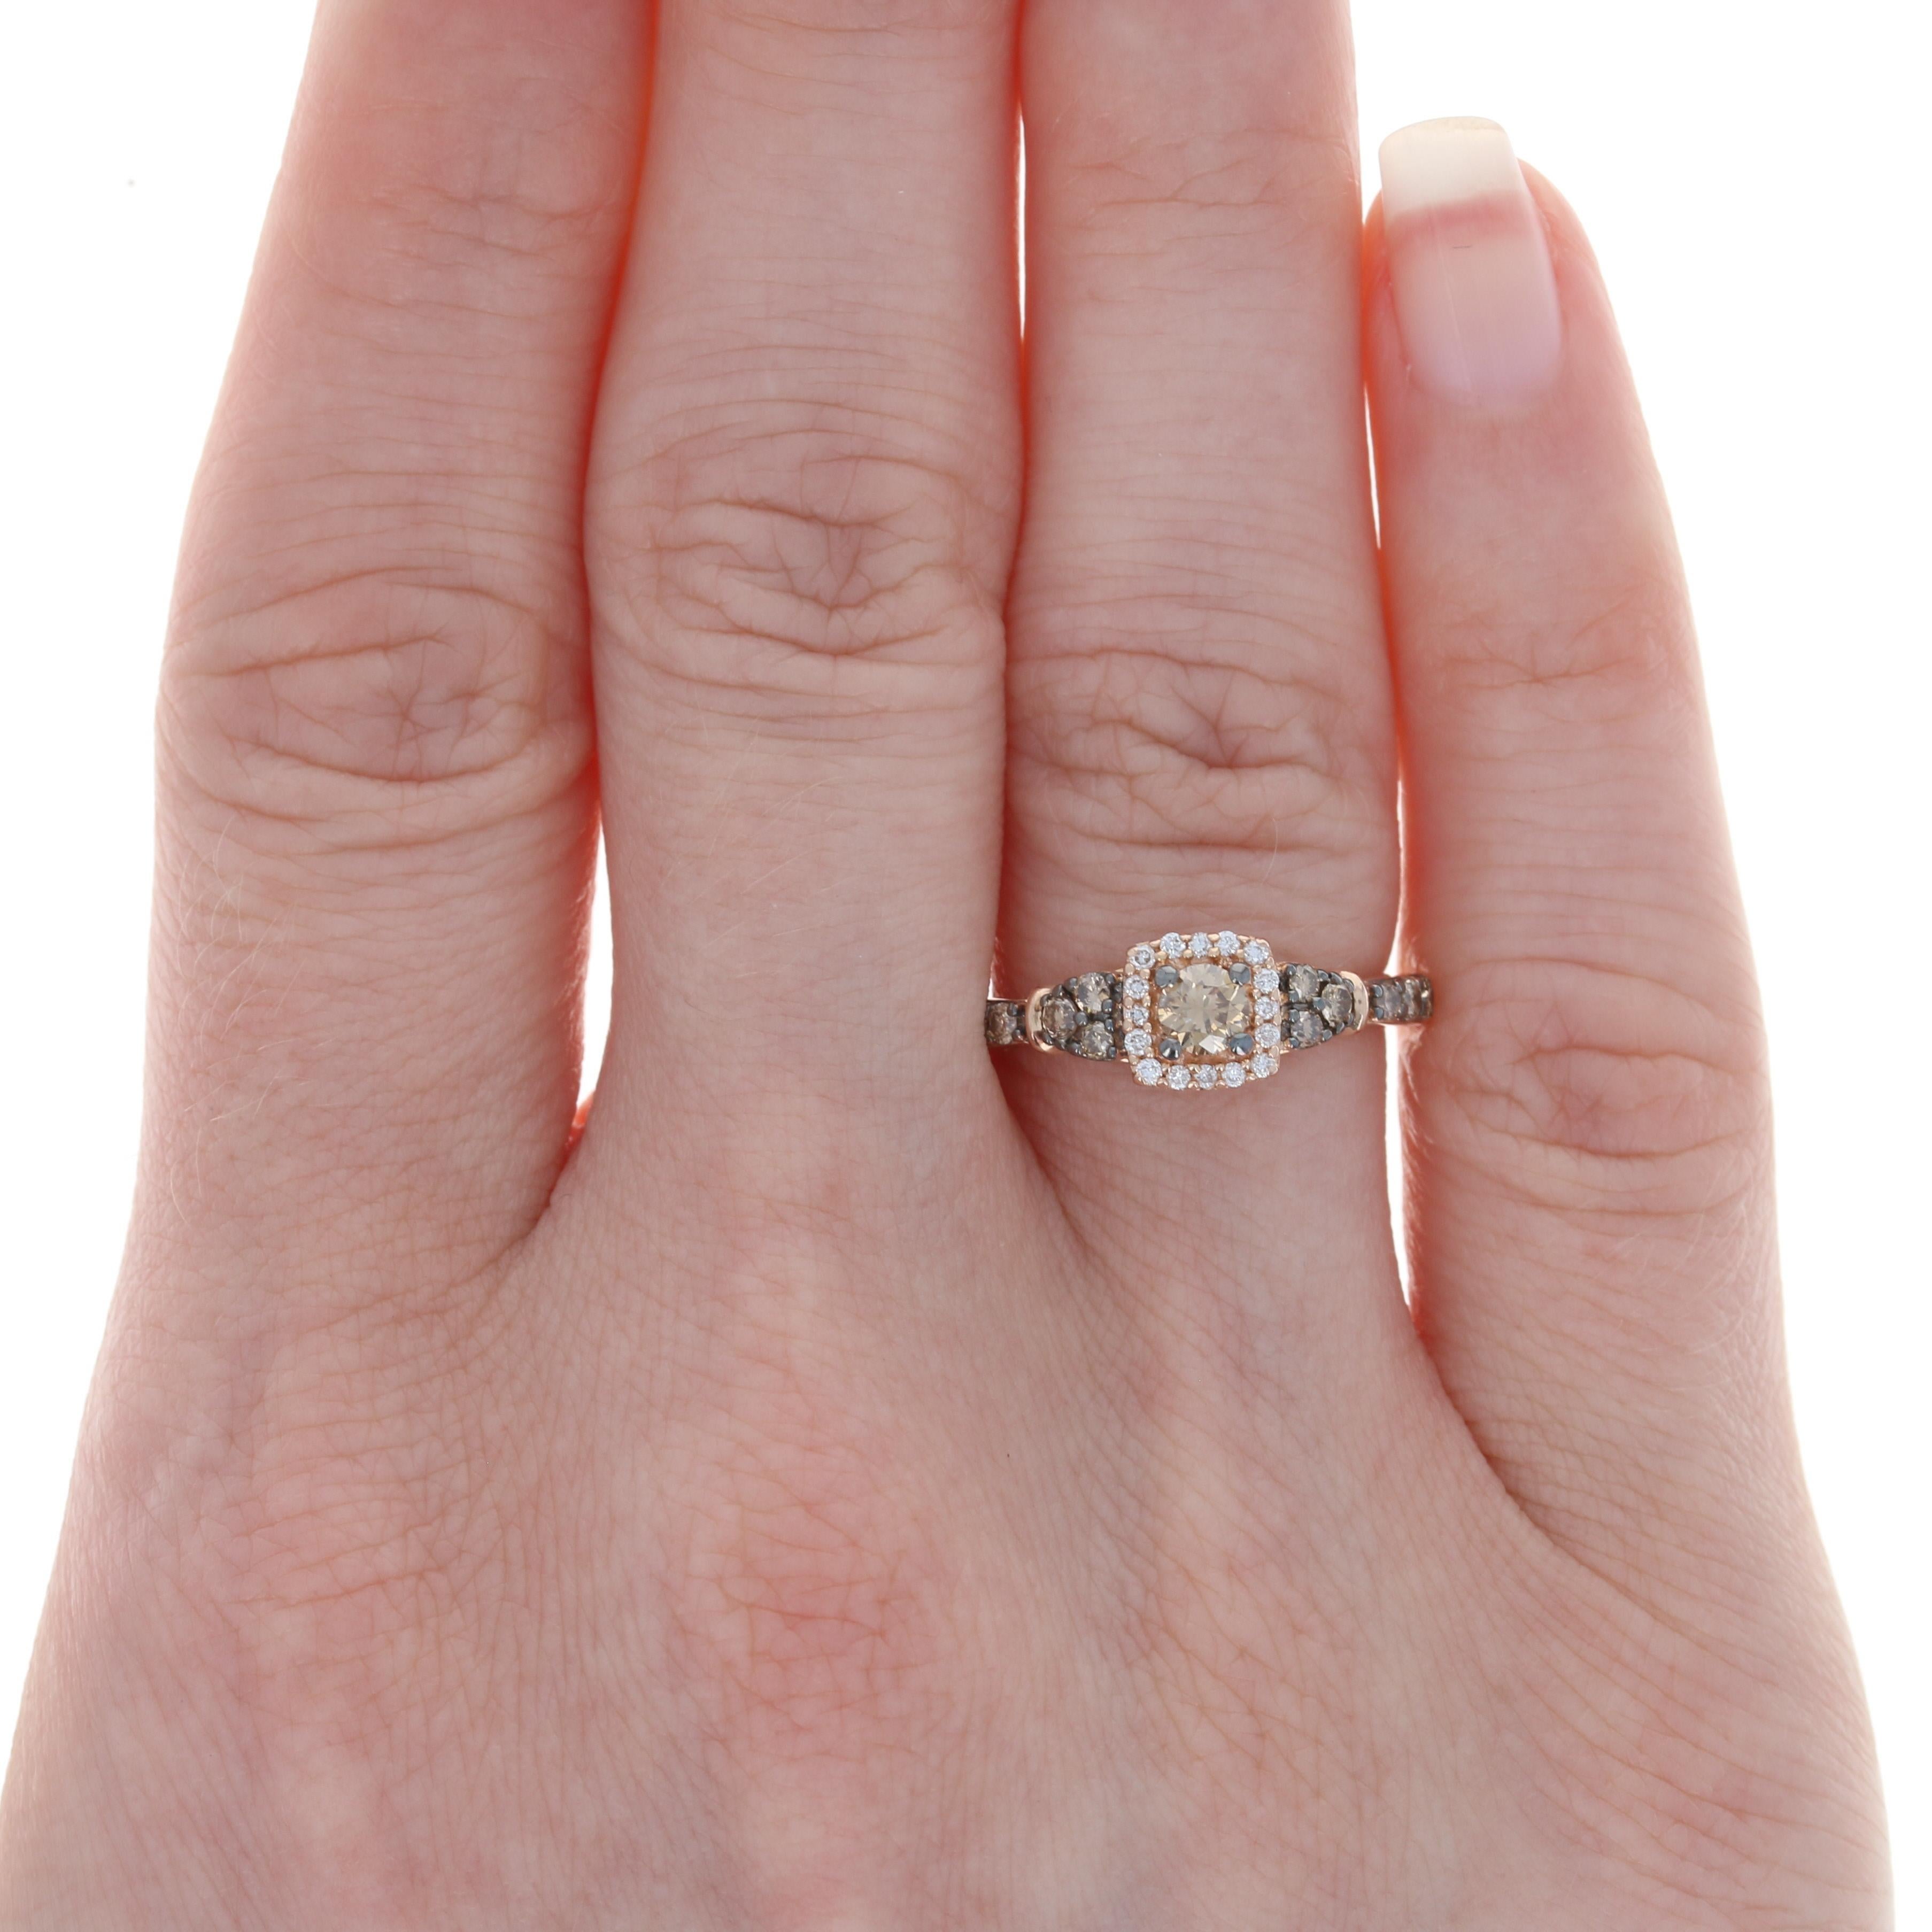 Size: 6
 Sizing Fee: Down 1 size for $25 or Up 2 sizes for $30
 Please note, the re-sizing process will remove the hallmark.
 
 Brand: Le Vian
 
 Metal Content: 14k Rose Gold
 
 Stone Information: 
 Natural Diamonds
 Total Carats: .50ctw
 Cut: Round